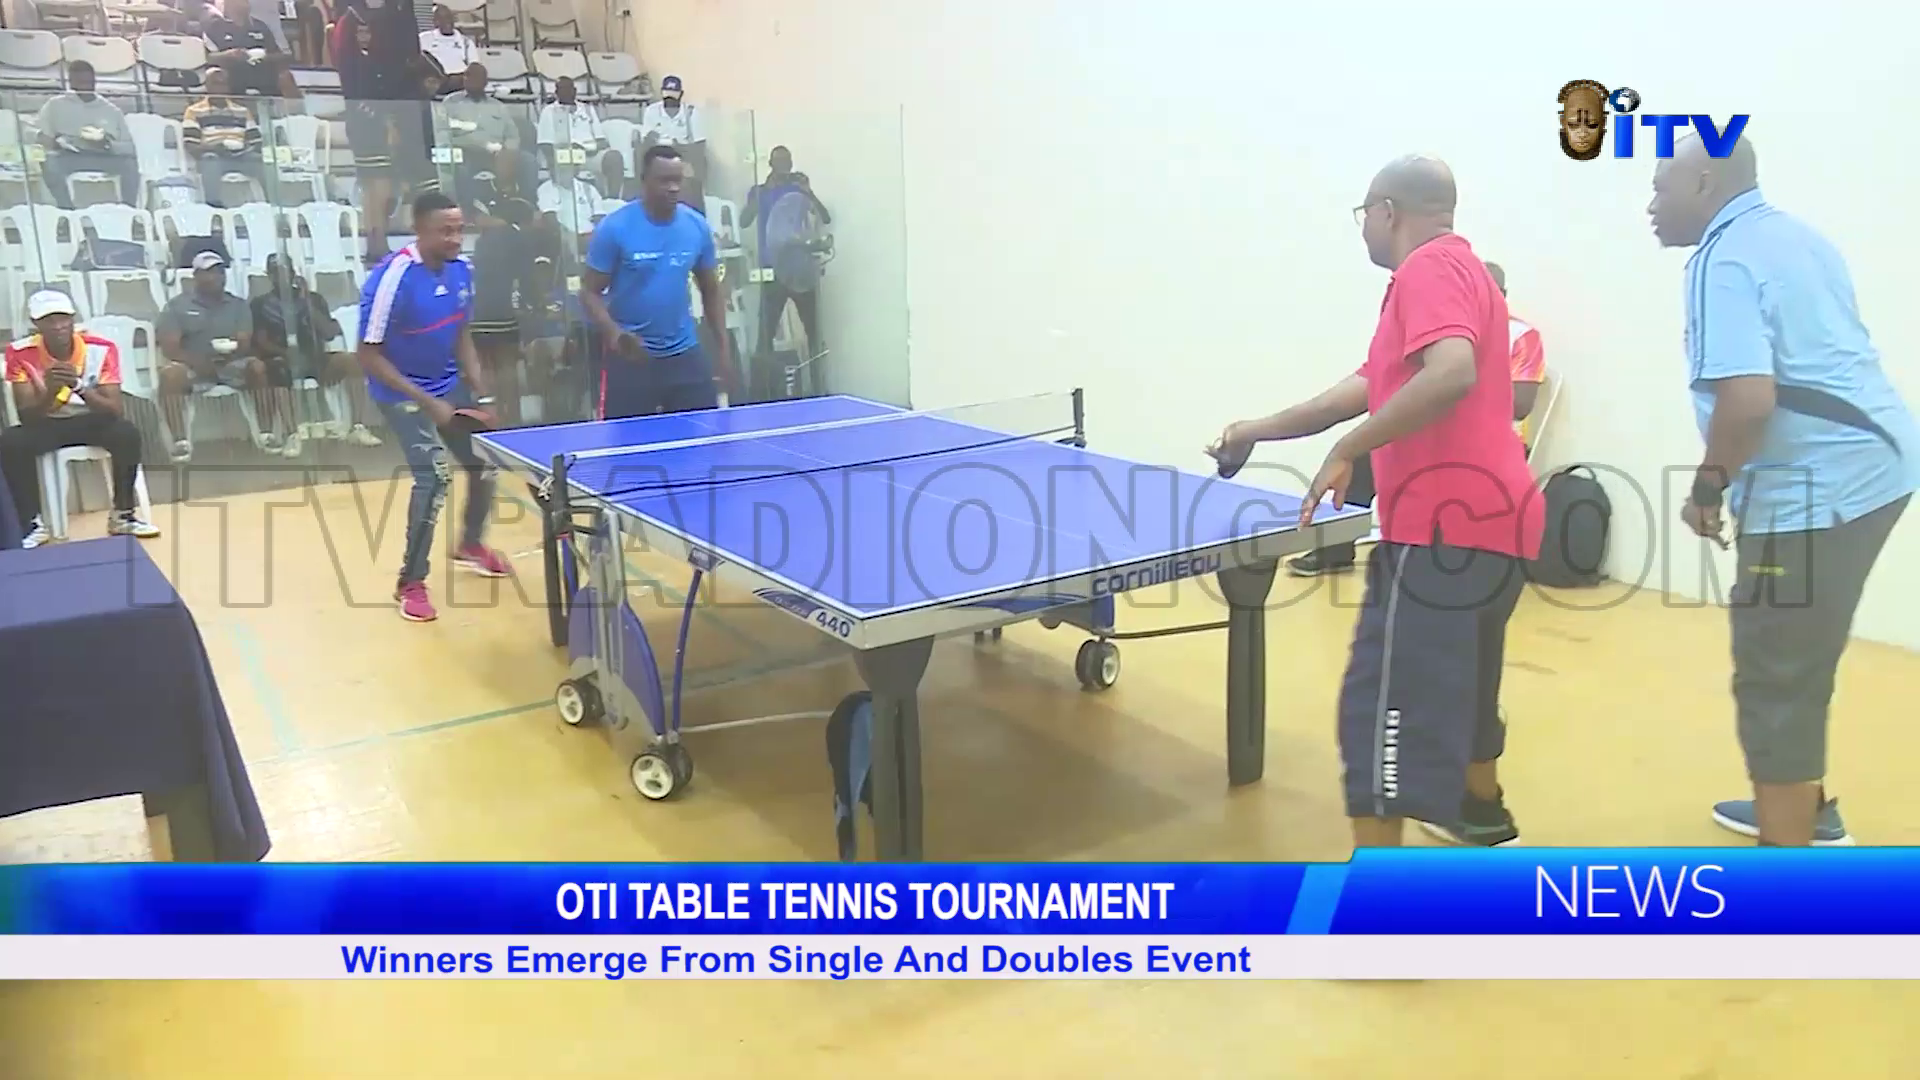 Oti Table Tennis Tournament: Winners Emerge From Single And Doubles Event